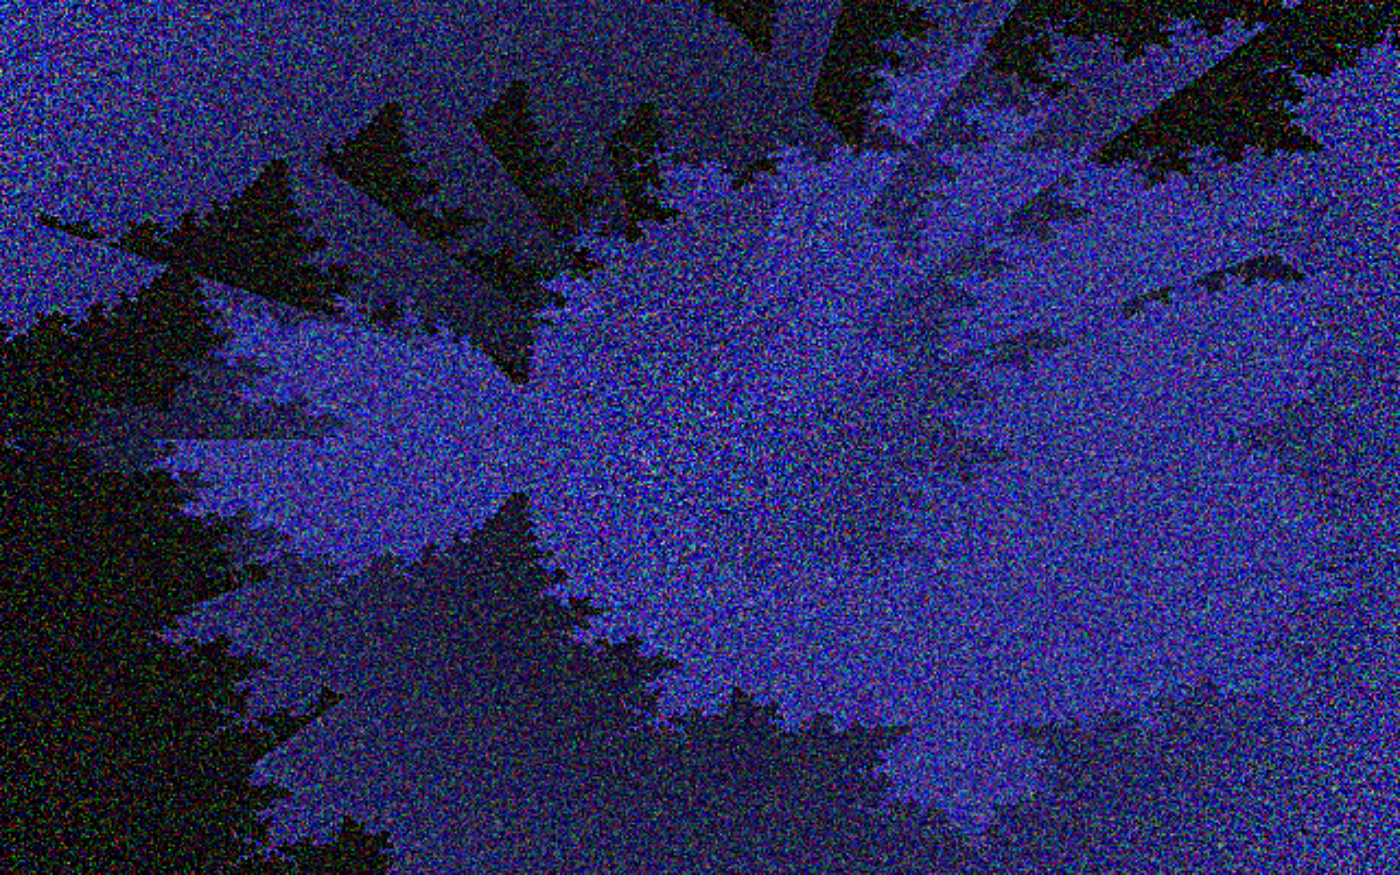 A purple on black fractal, with a lot of noise